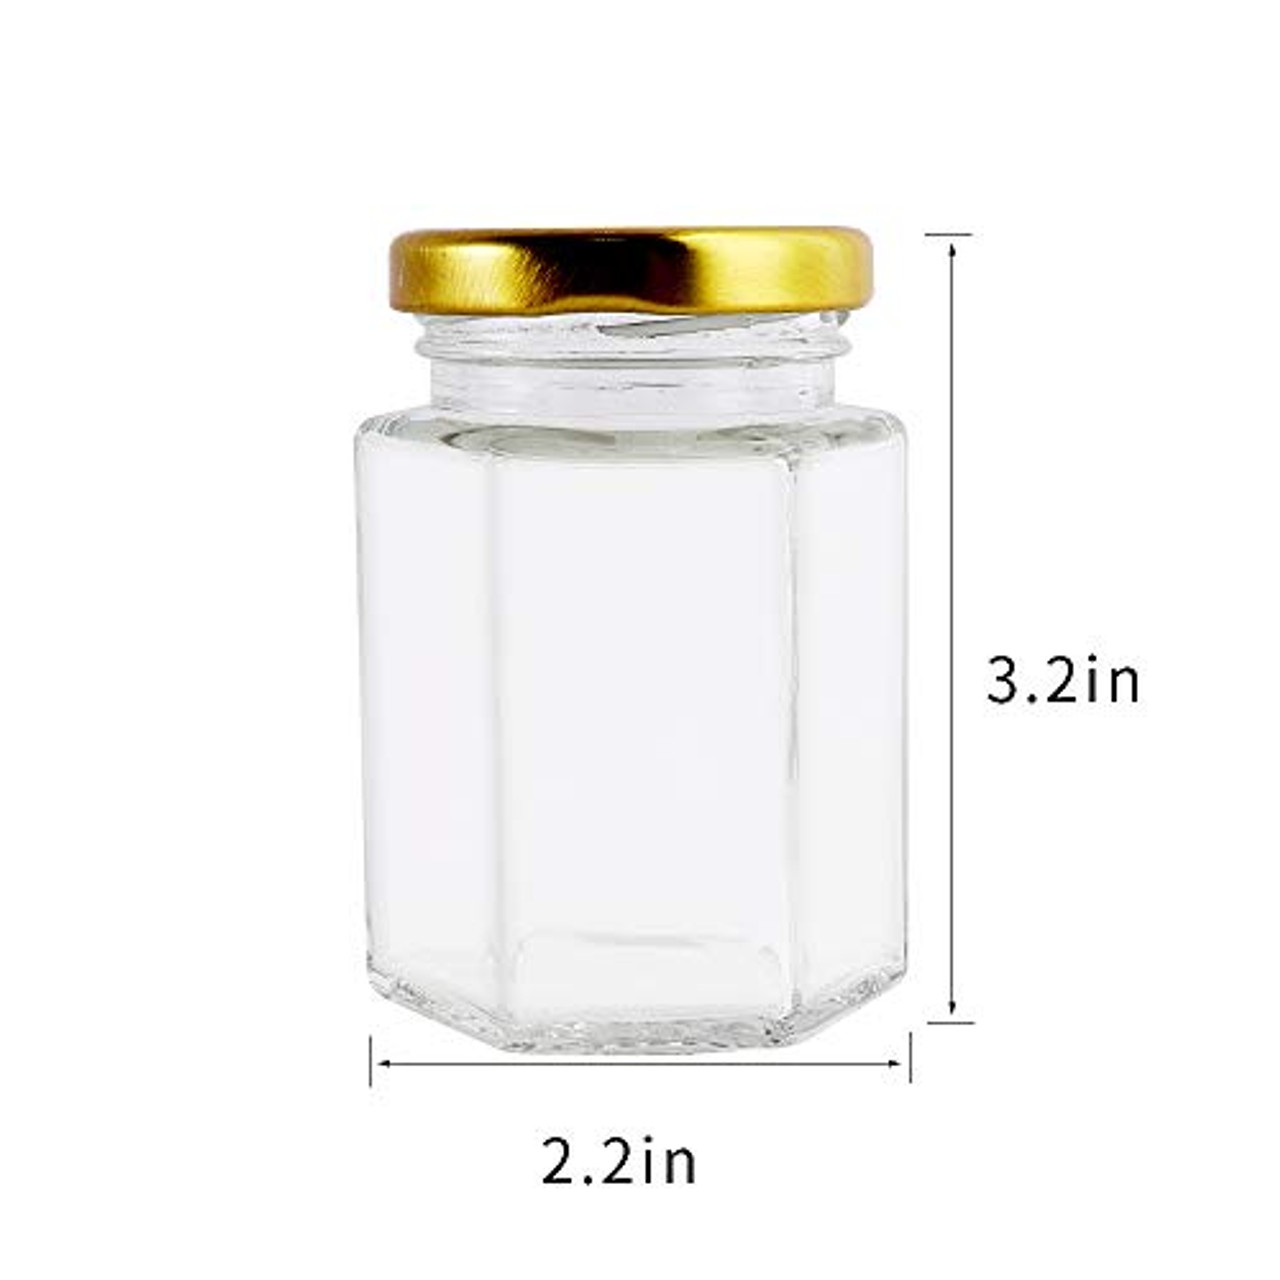 Set of 9 Clear Glass Spice Jars with Rope Pattern and Sifting Lids